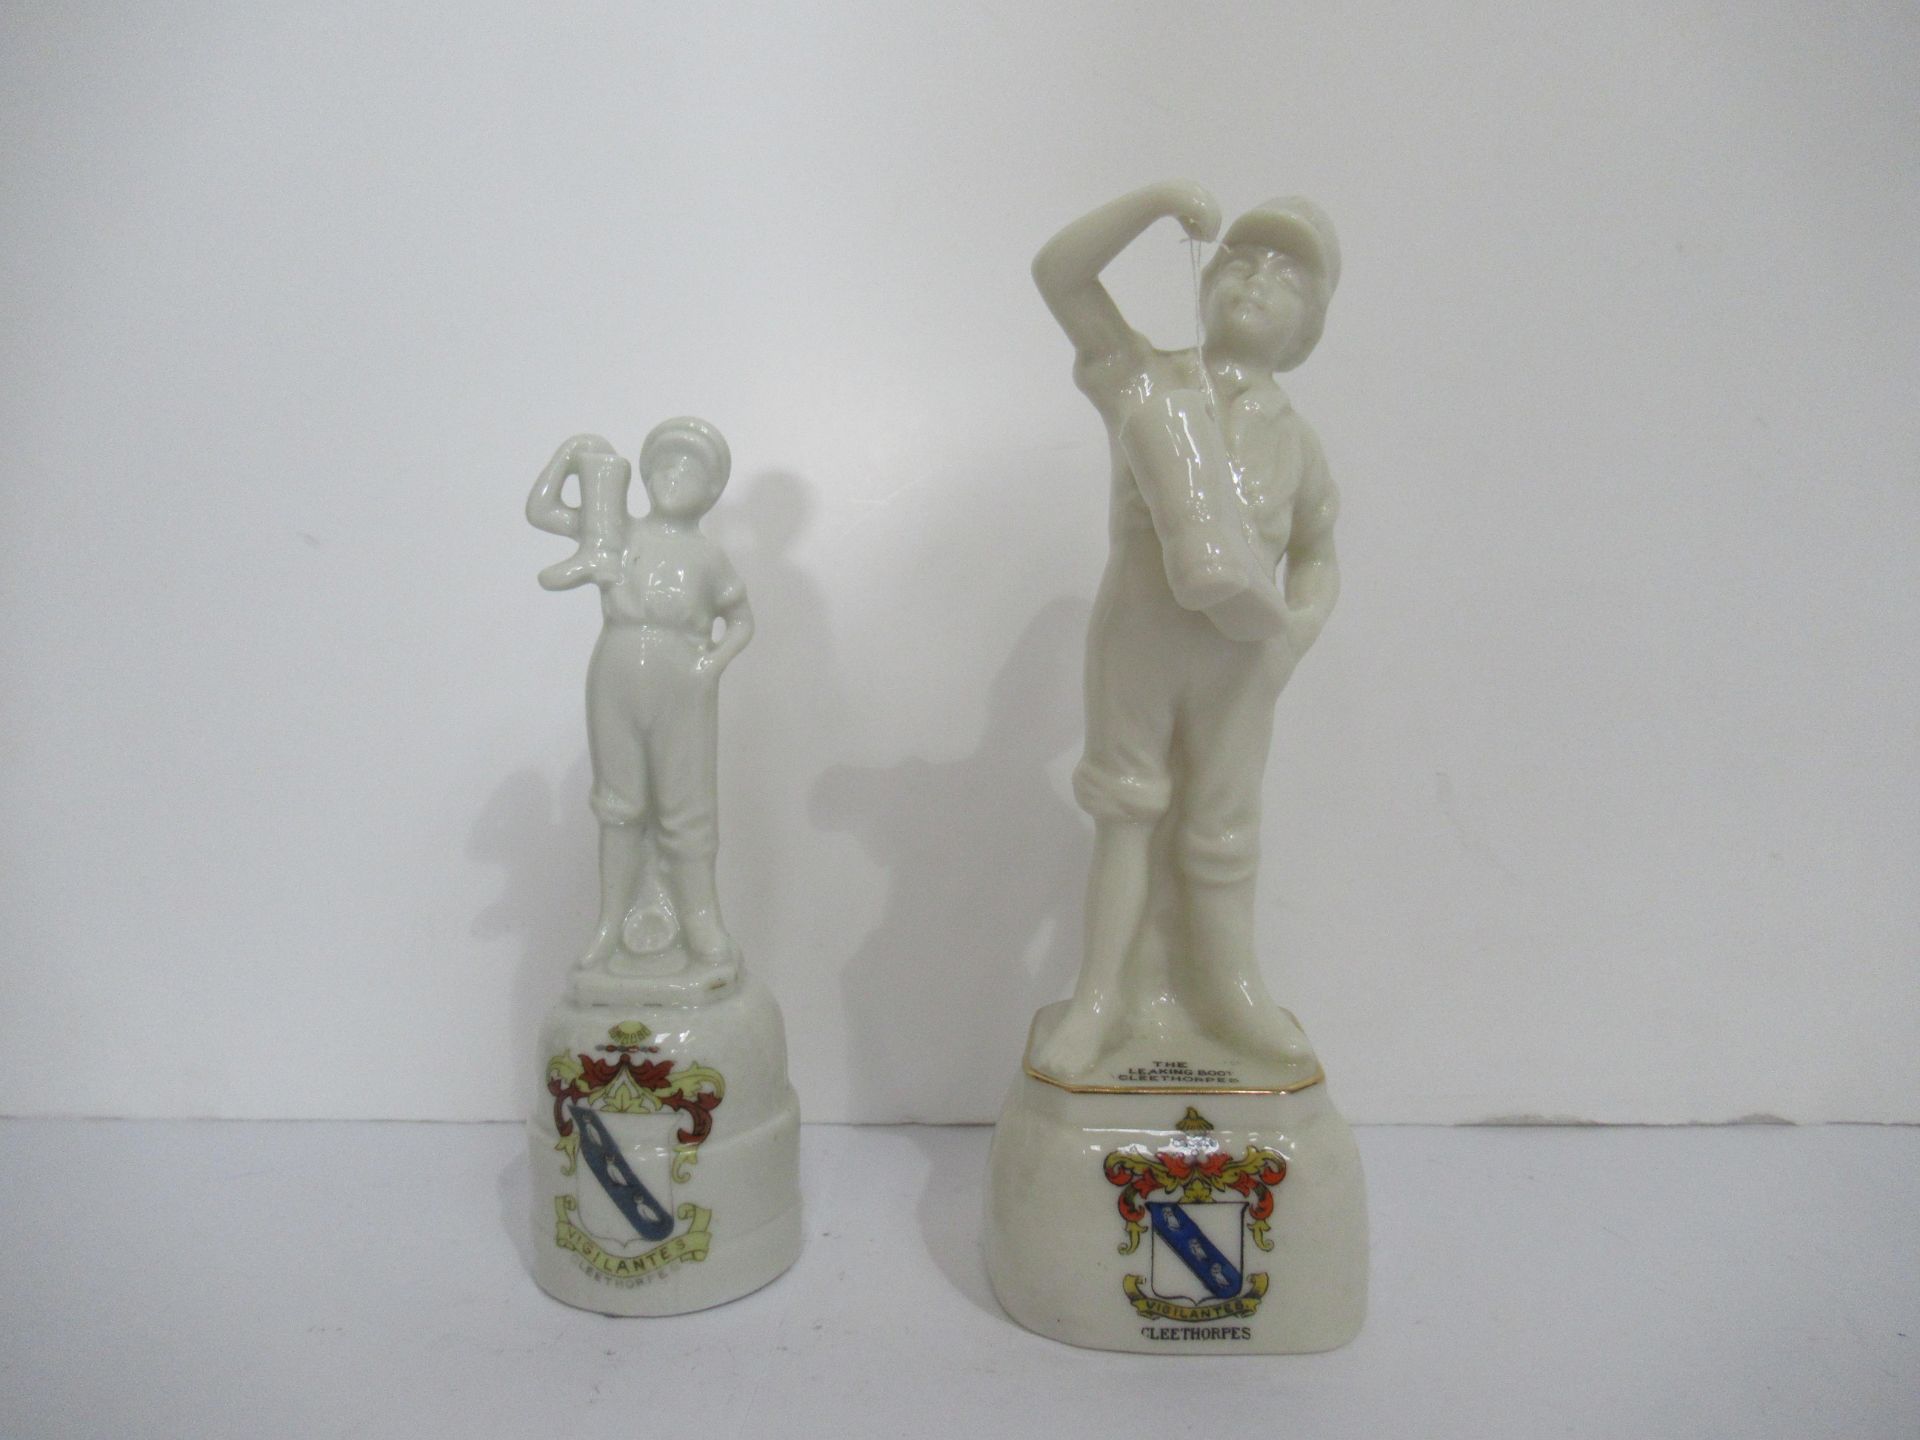 2x Crested China figures of the Leaking Boot' both with Cleethorpes coat of arms